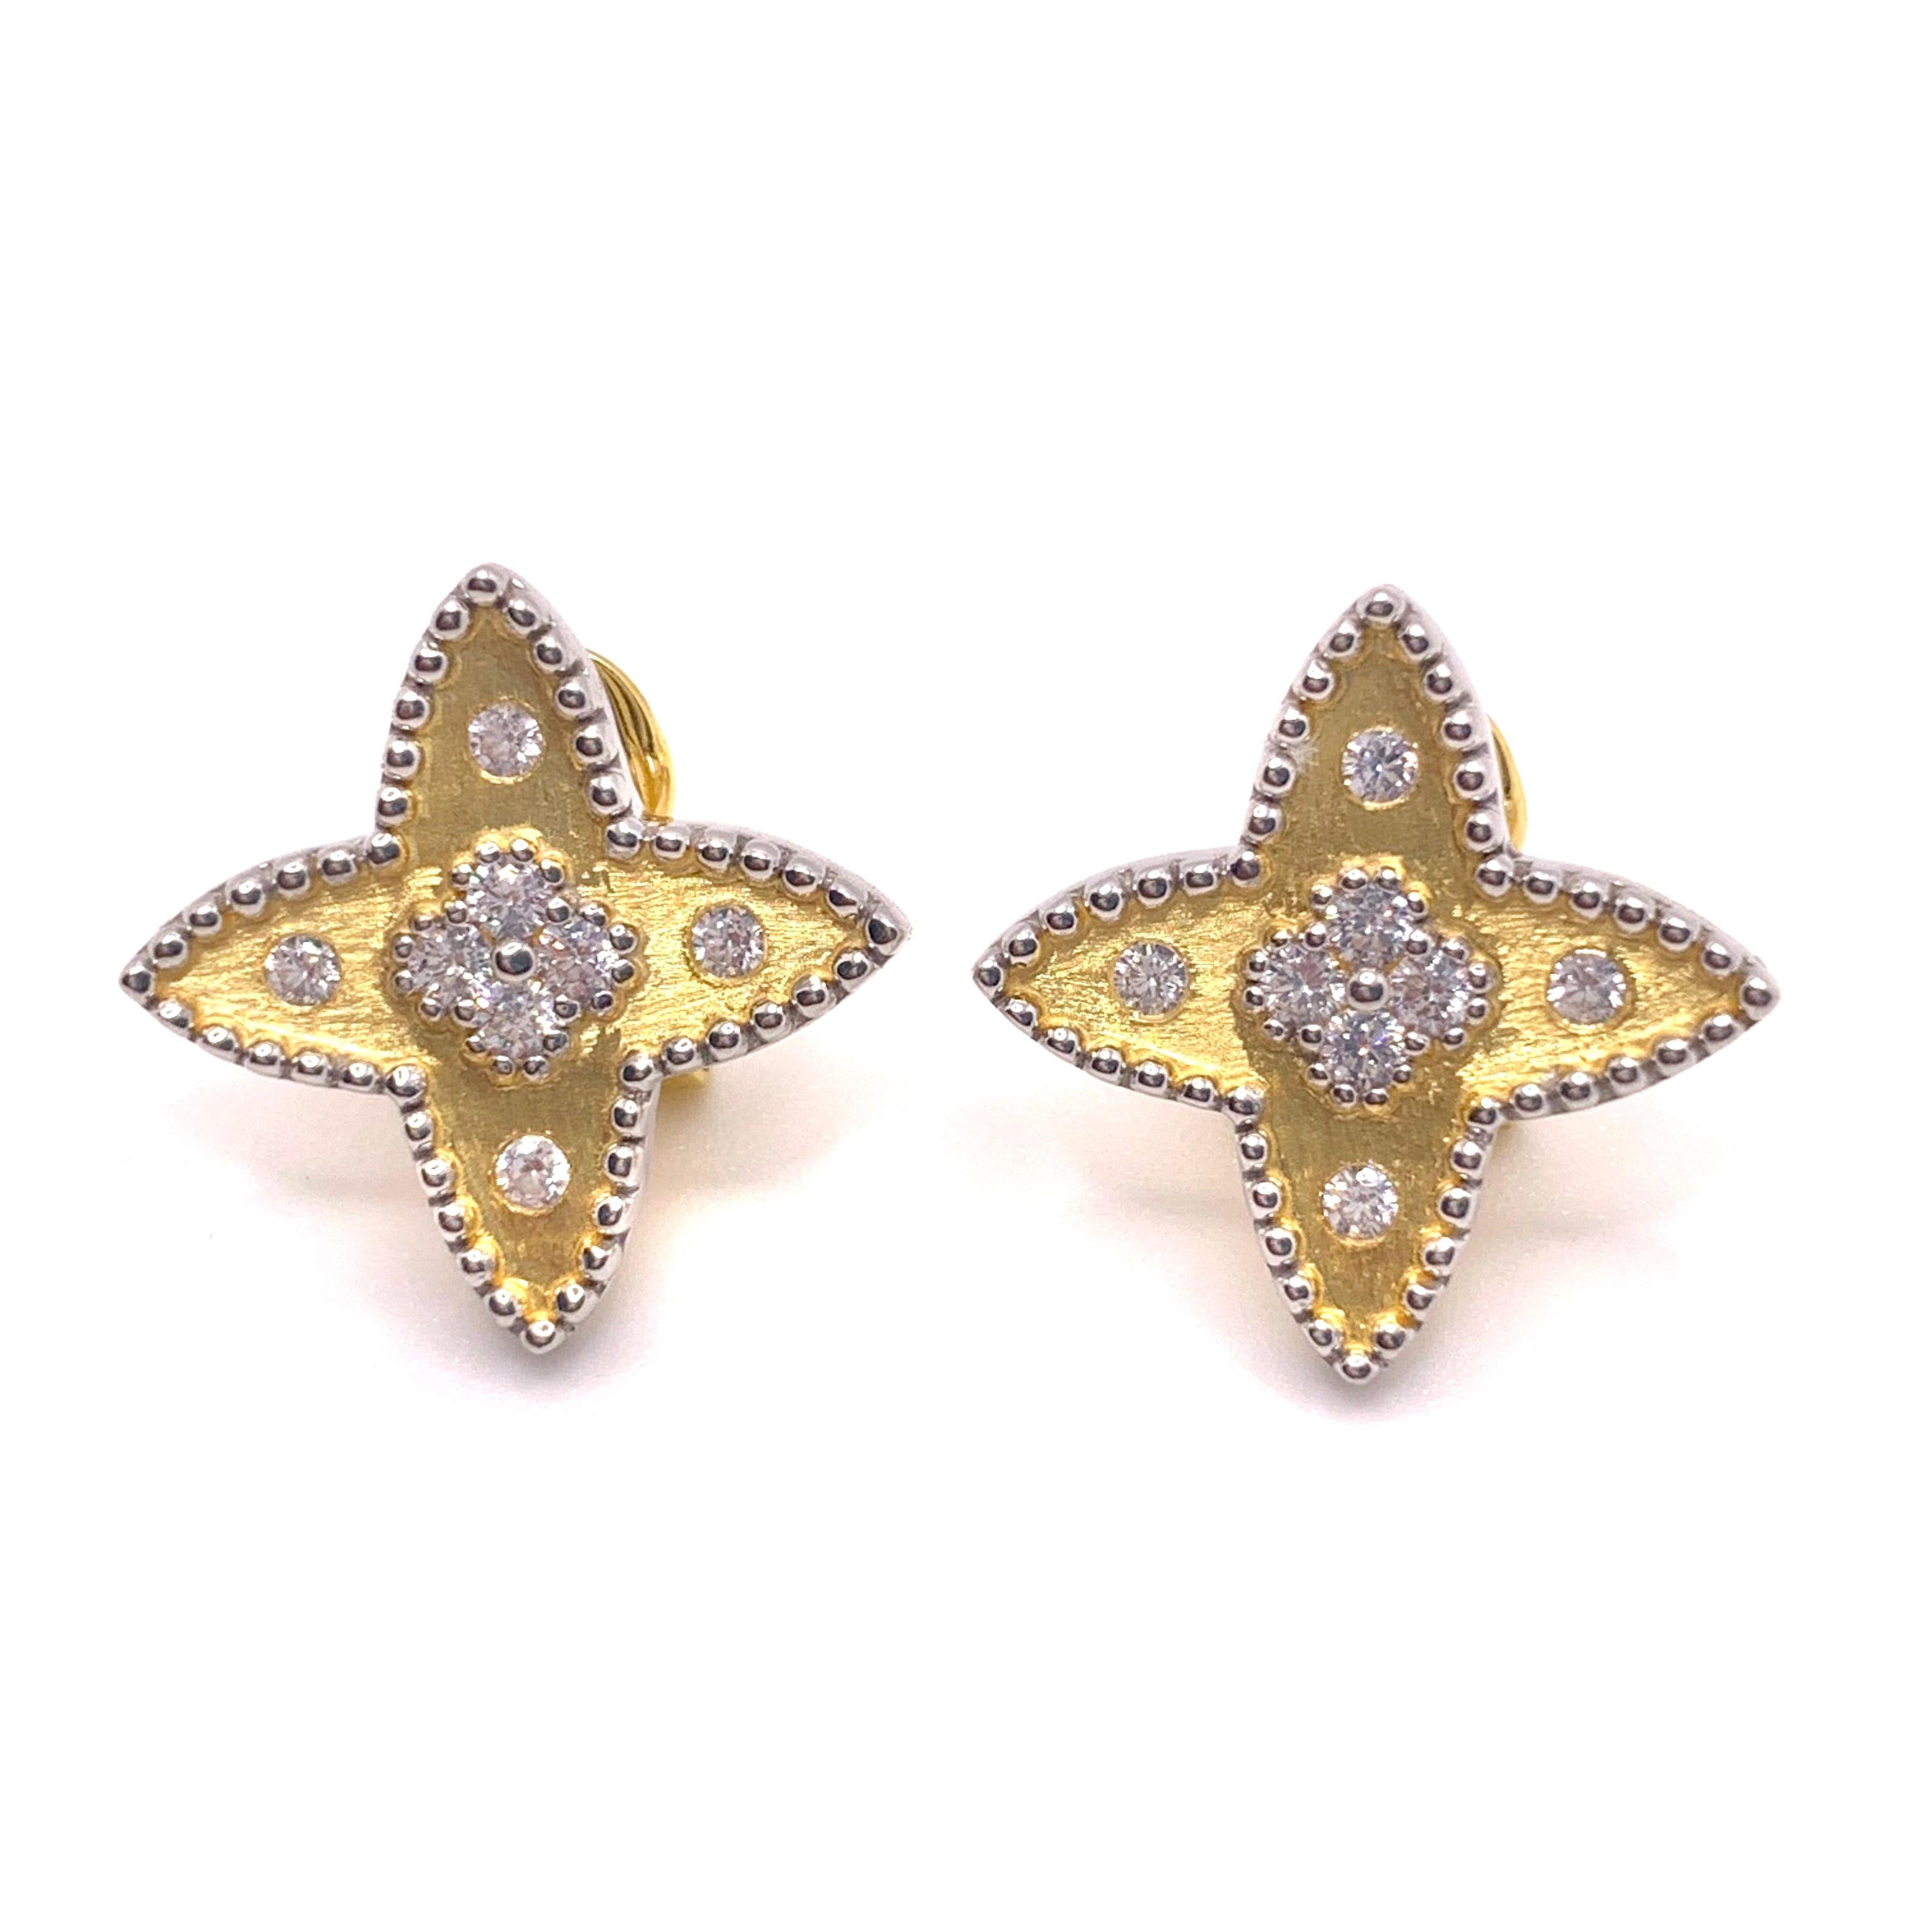 Bijoux Num clover pattern star shape vermeil earrings

These beautiful pair of earrings feature 16pcs of round simulated diamond handset in 18k yellow gold vermeil sterling silver with brush satin matte finish. Straight post with omega clip back